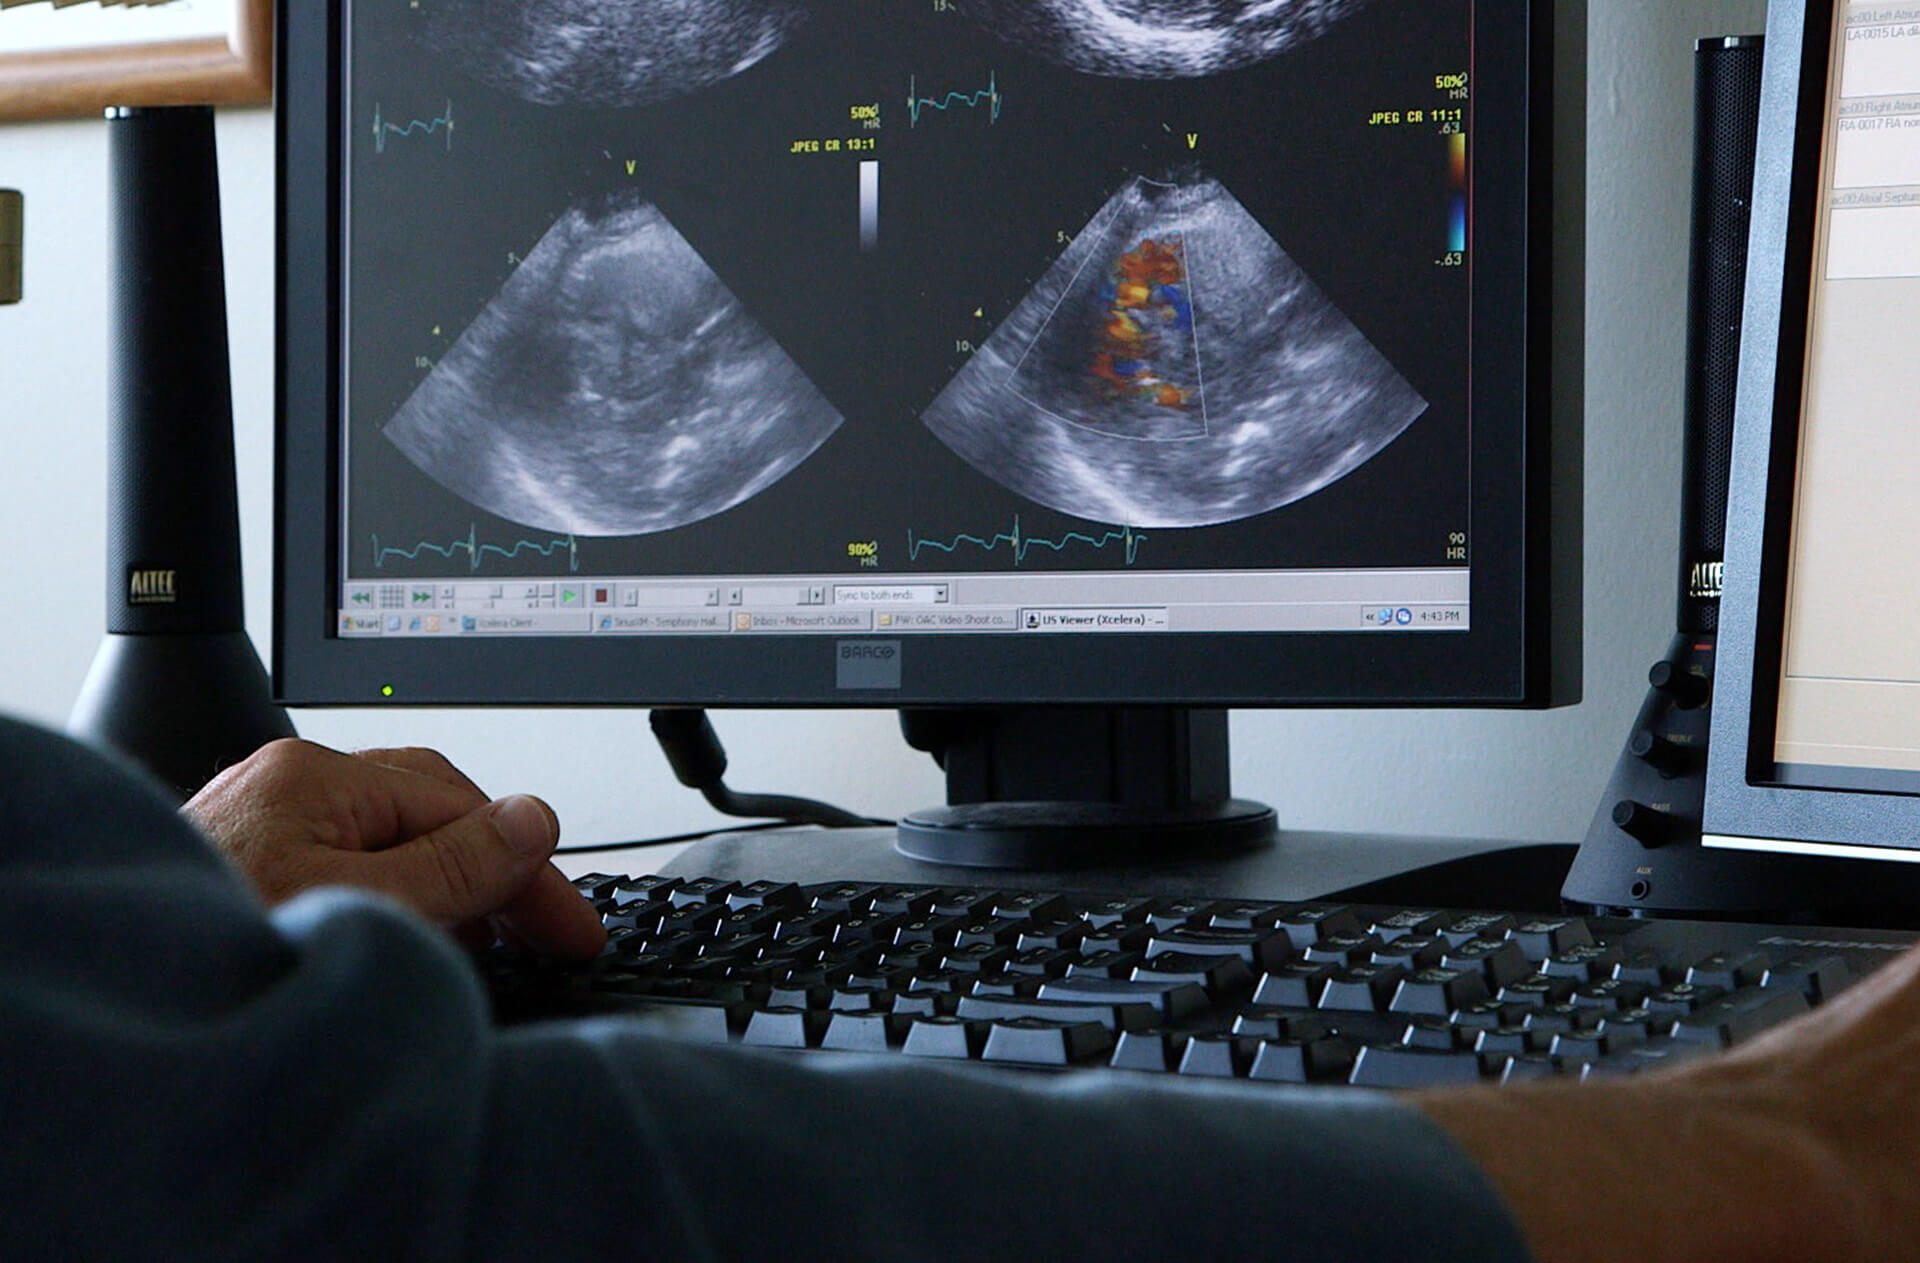 The OAC is a strong supporter of Ontario’s echocardiography standards, maintained by CorHealth Ontario, and the provincial Echocardiography Quality Improvement (EQI) Program, which accredits all echocardiography facilities in the province.  The OAC has been an important EQI program stakeholder since 2016.  We believe that echocardiography service providers must provide high […]